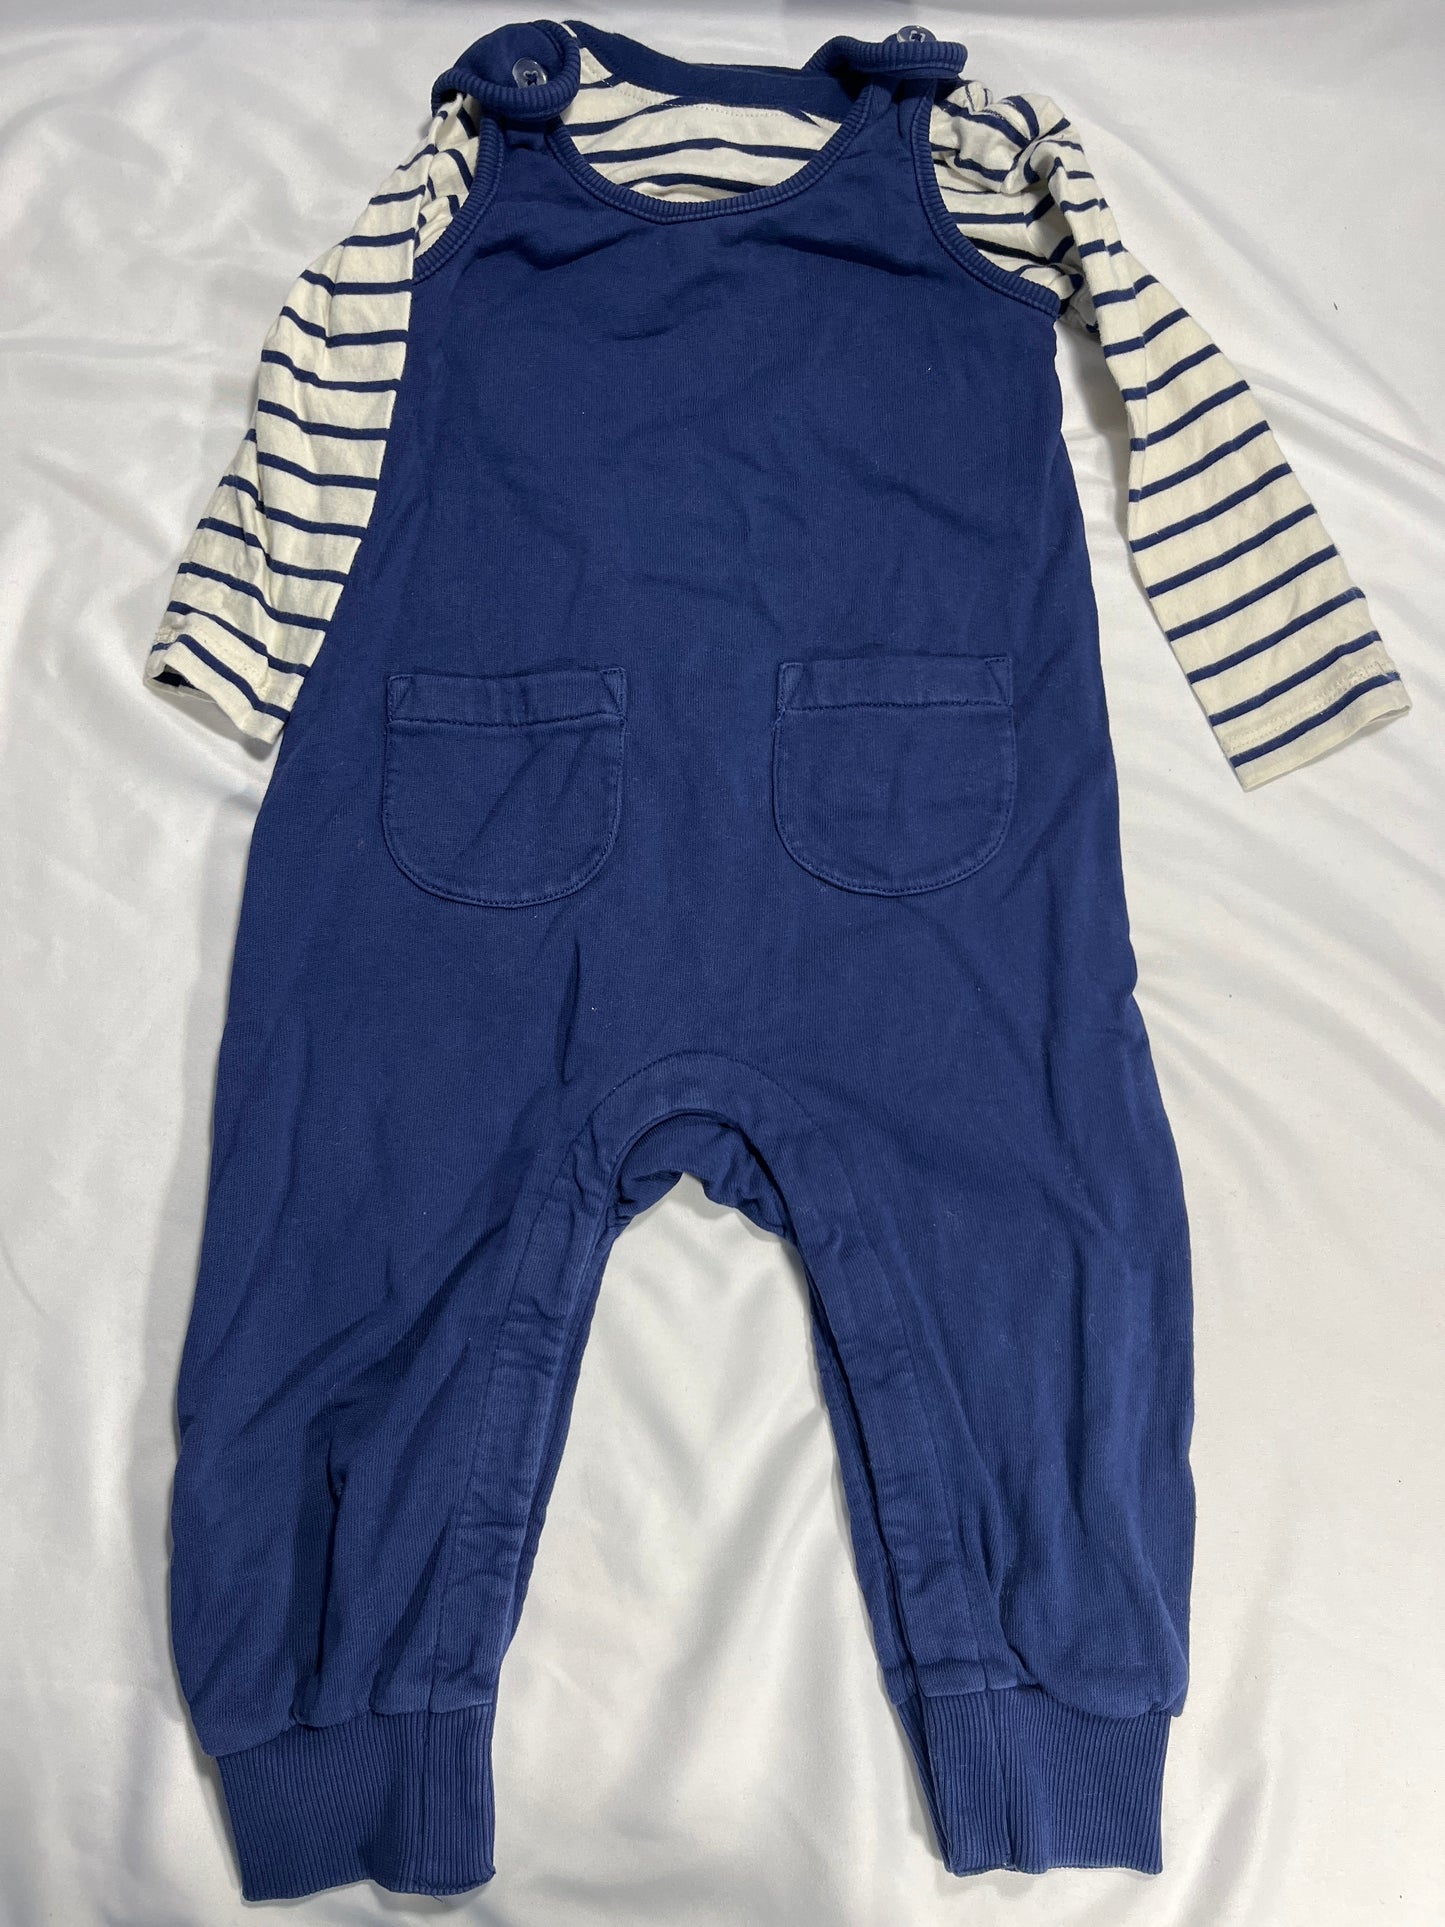 2t Hanna Andersson navy overalls and shirt set